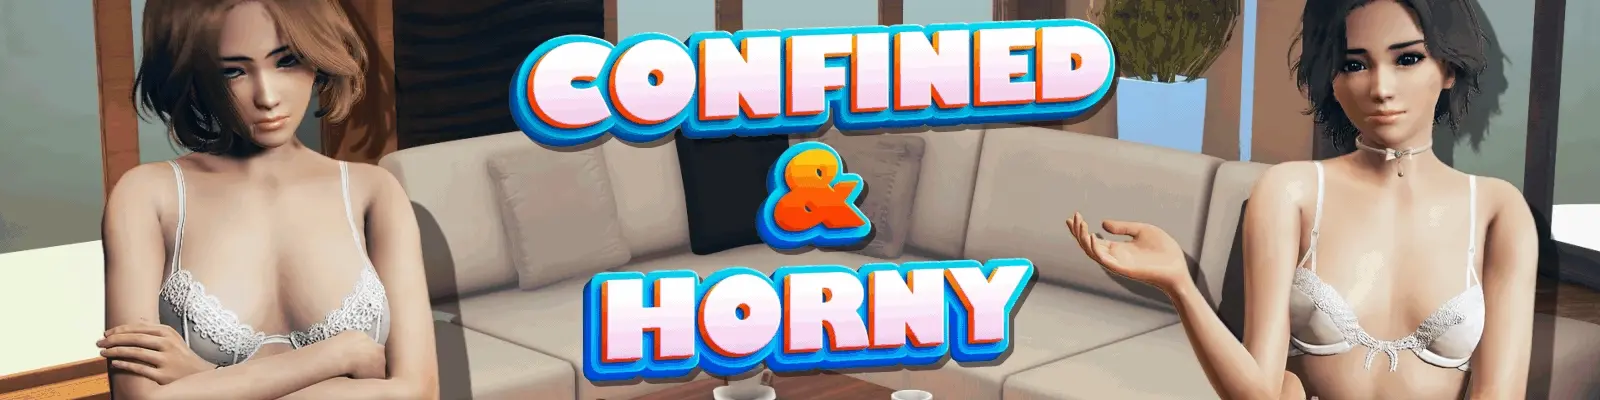 Confined and Horny main image